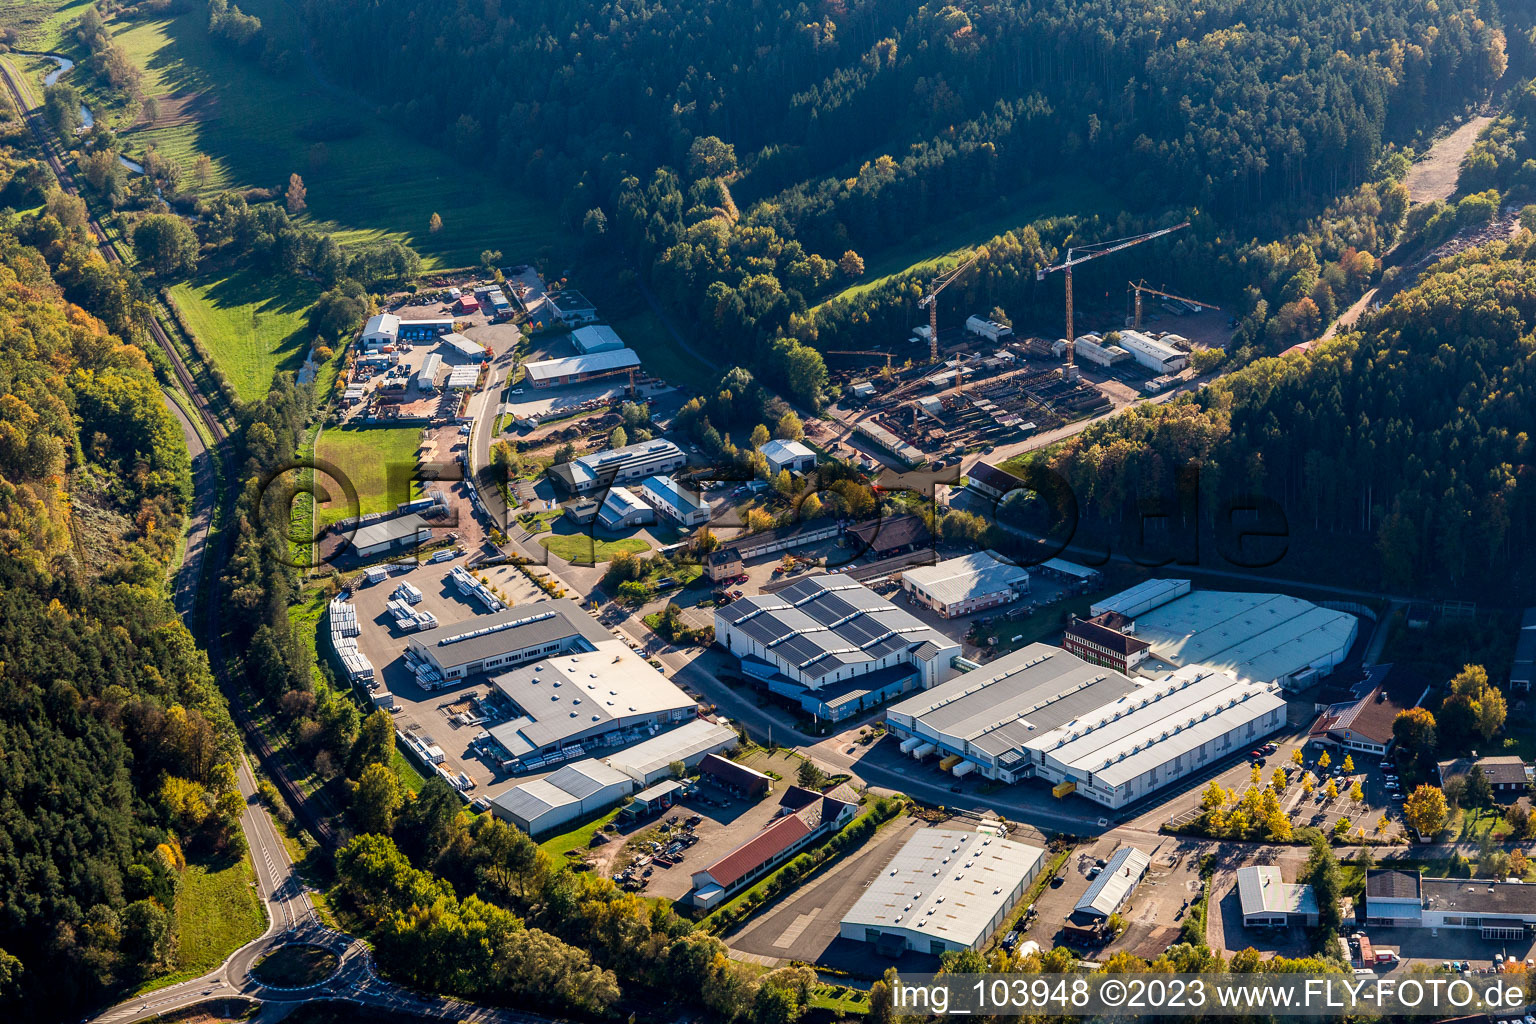 Reichenbach industrial area in Schindhard in the state Rhineland-Palatinate, Germany